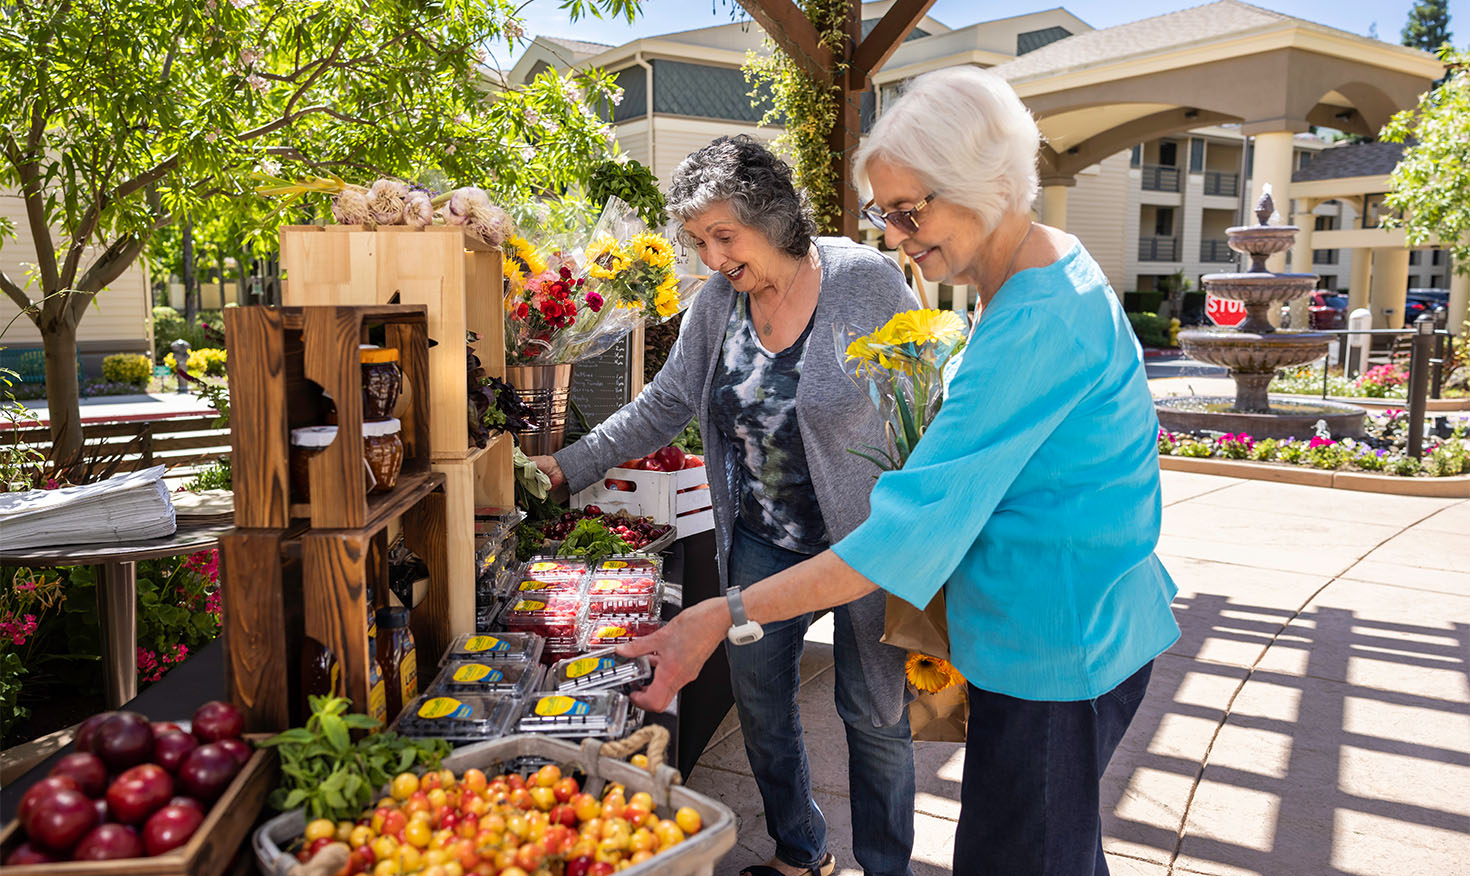 Two senior women shopping for produce and flowers at a farmers market